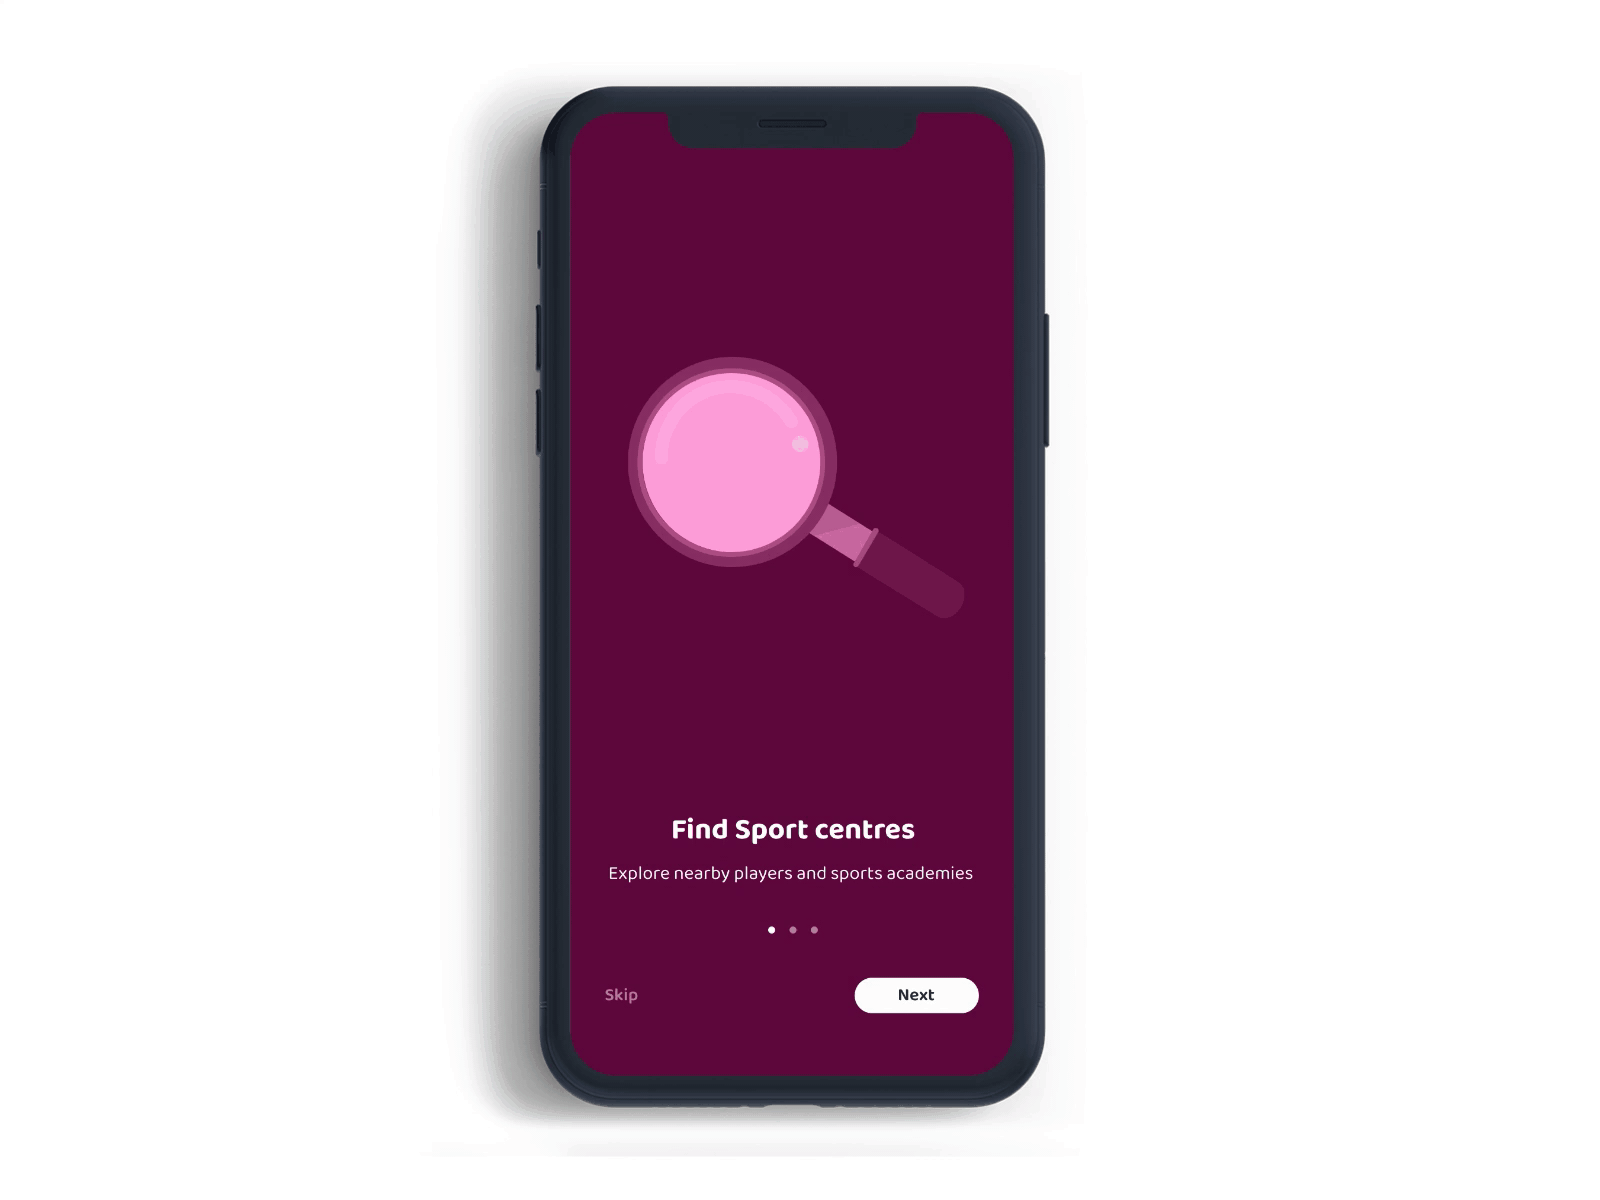 A simple Onboarding for a Sports Event App | Adobe Xd animation app design illustration interaction microintercation minimal ui ux